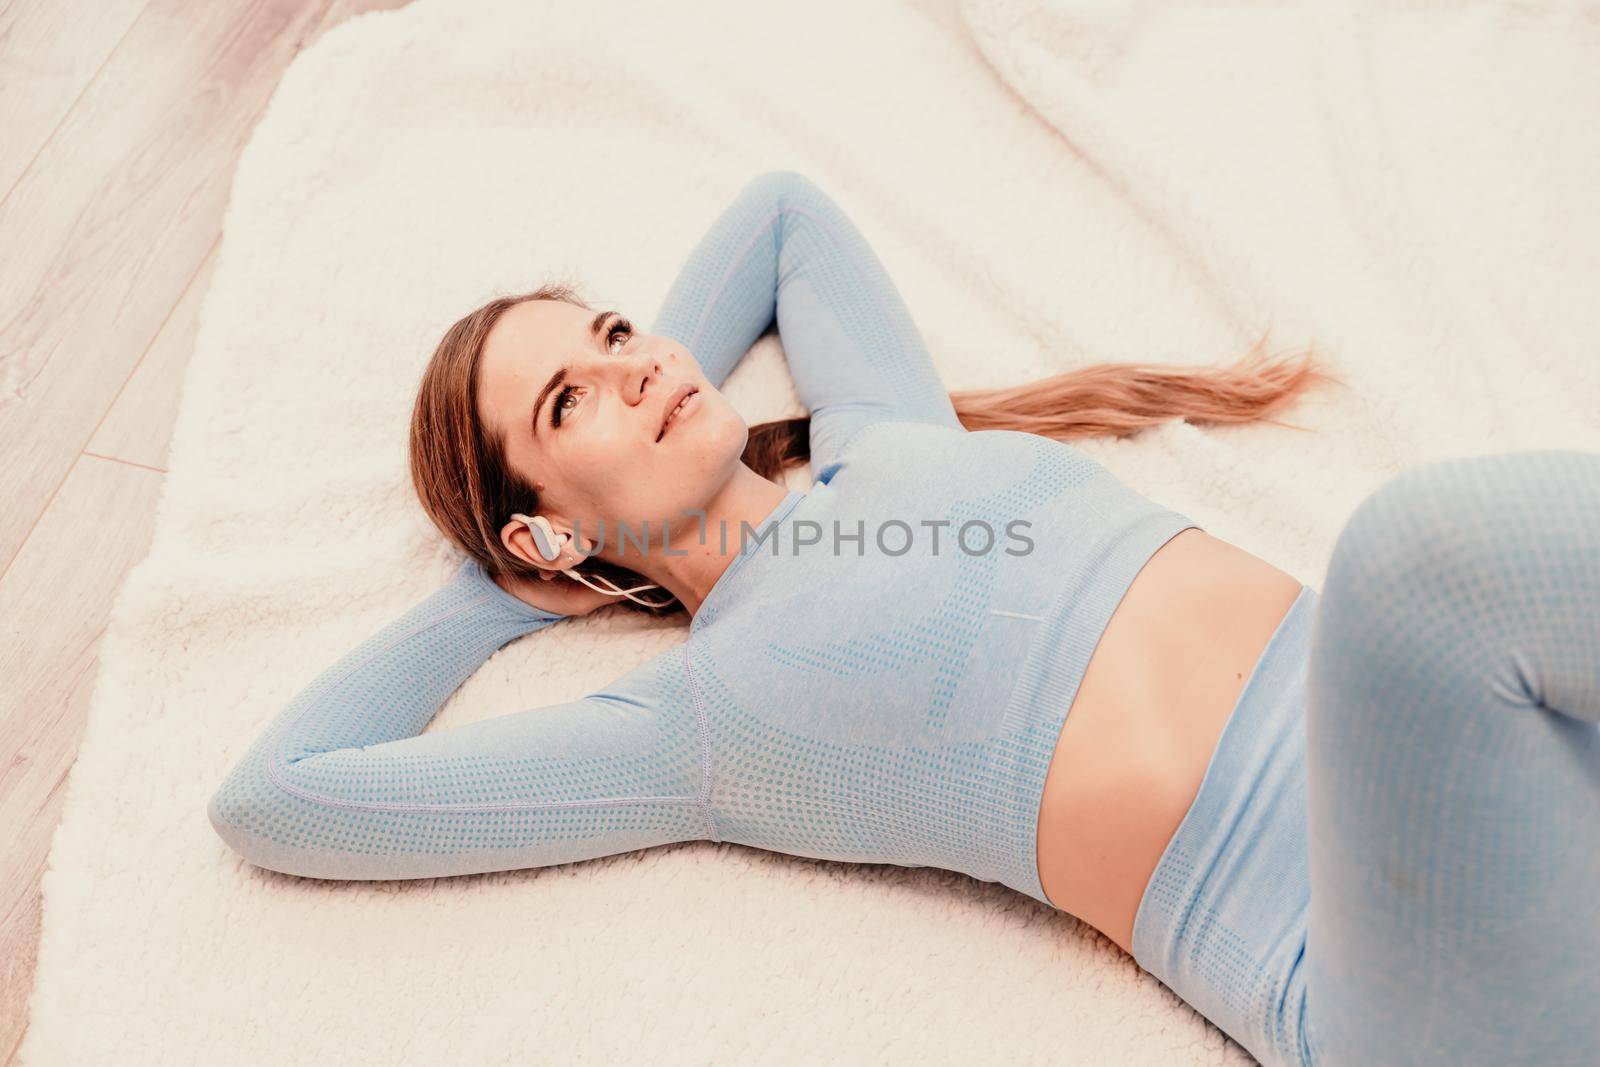 Top view portrait of relaxed woman listening to music with headphones lying on carpet at home. She is dressed in a blue tracksuit. by Matiunina